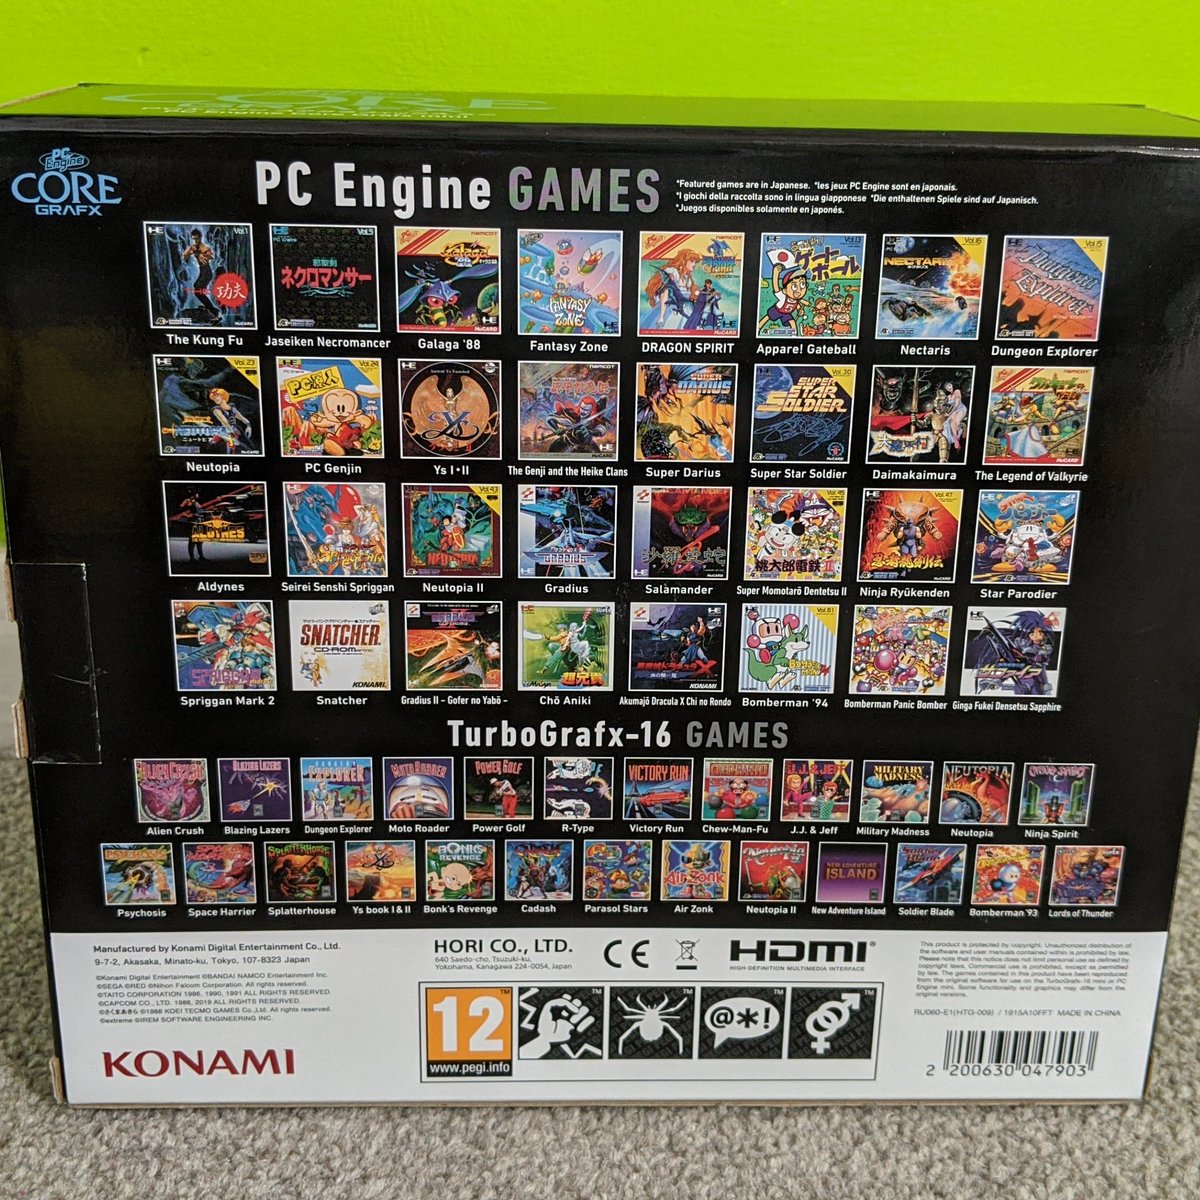 In case you don't already know, there are a shit-ton of games in this thing. Some of them are TurboGrafx-16 games (i.e. American releases) and others are PC Engine ones (i.e. Japanese releases). Only a few of the Japanese ones are unplayable if you don't speak the language.